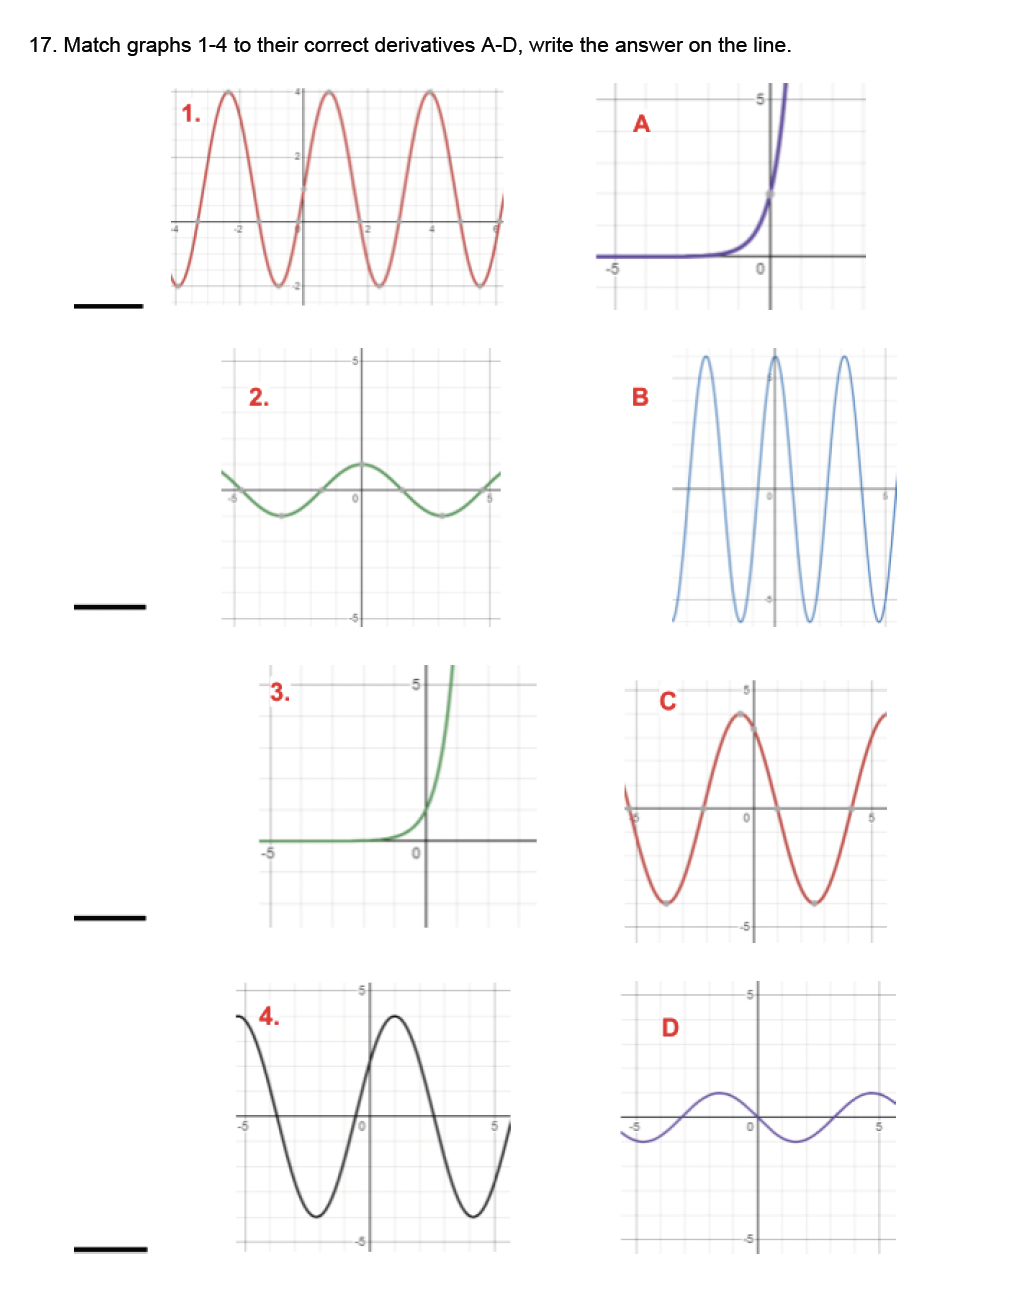 17. Match graphs 1-4 to their correct derivatives A-D, write the answer on the line.
1.
AM
A
|
2.
B
3.
4.
I W
W
D